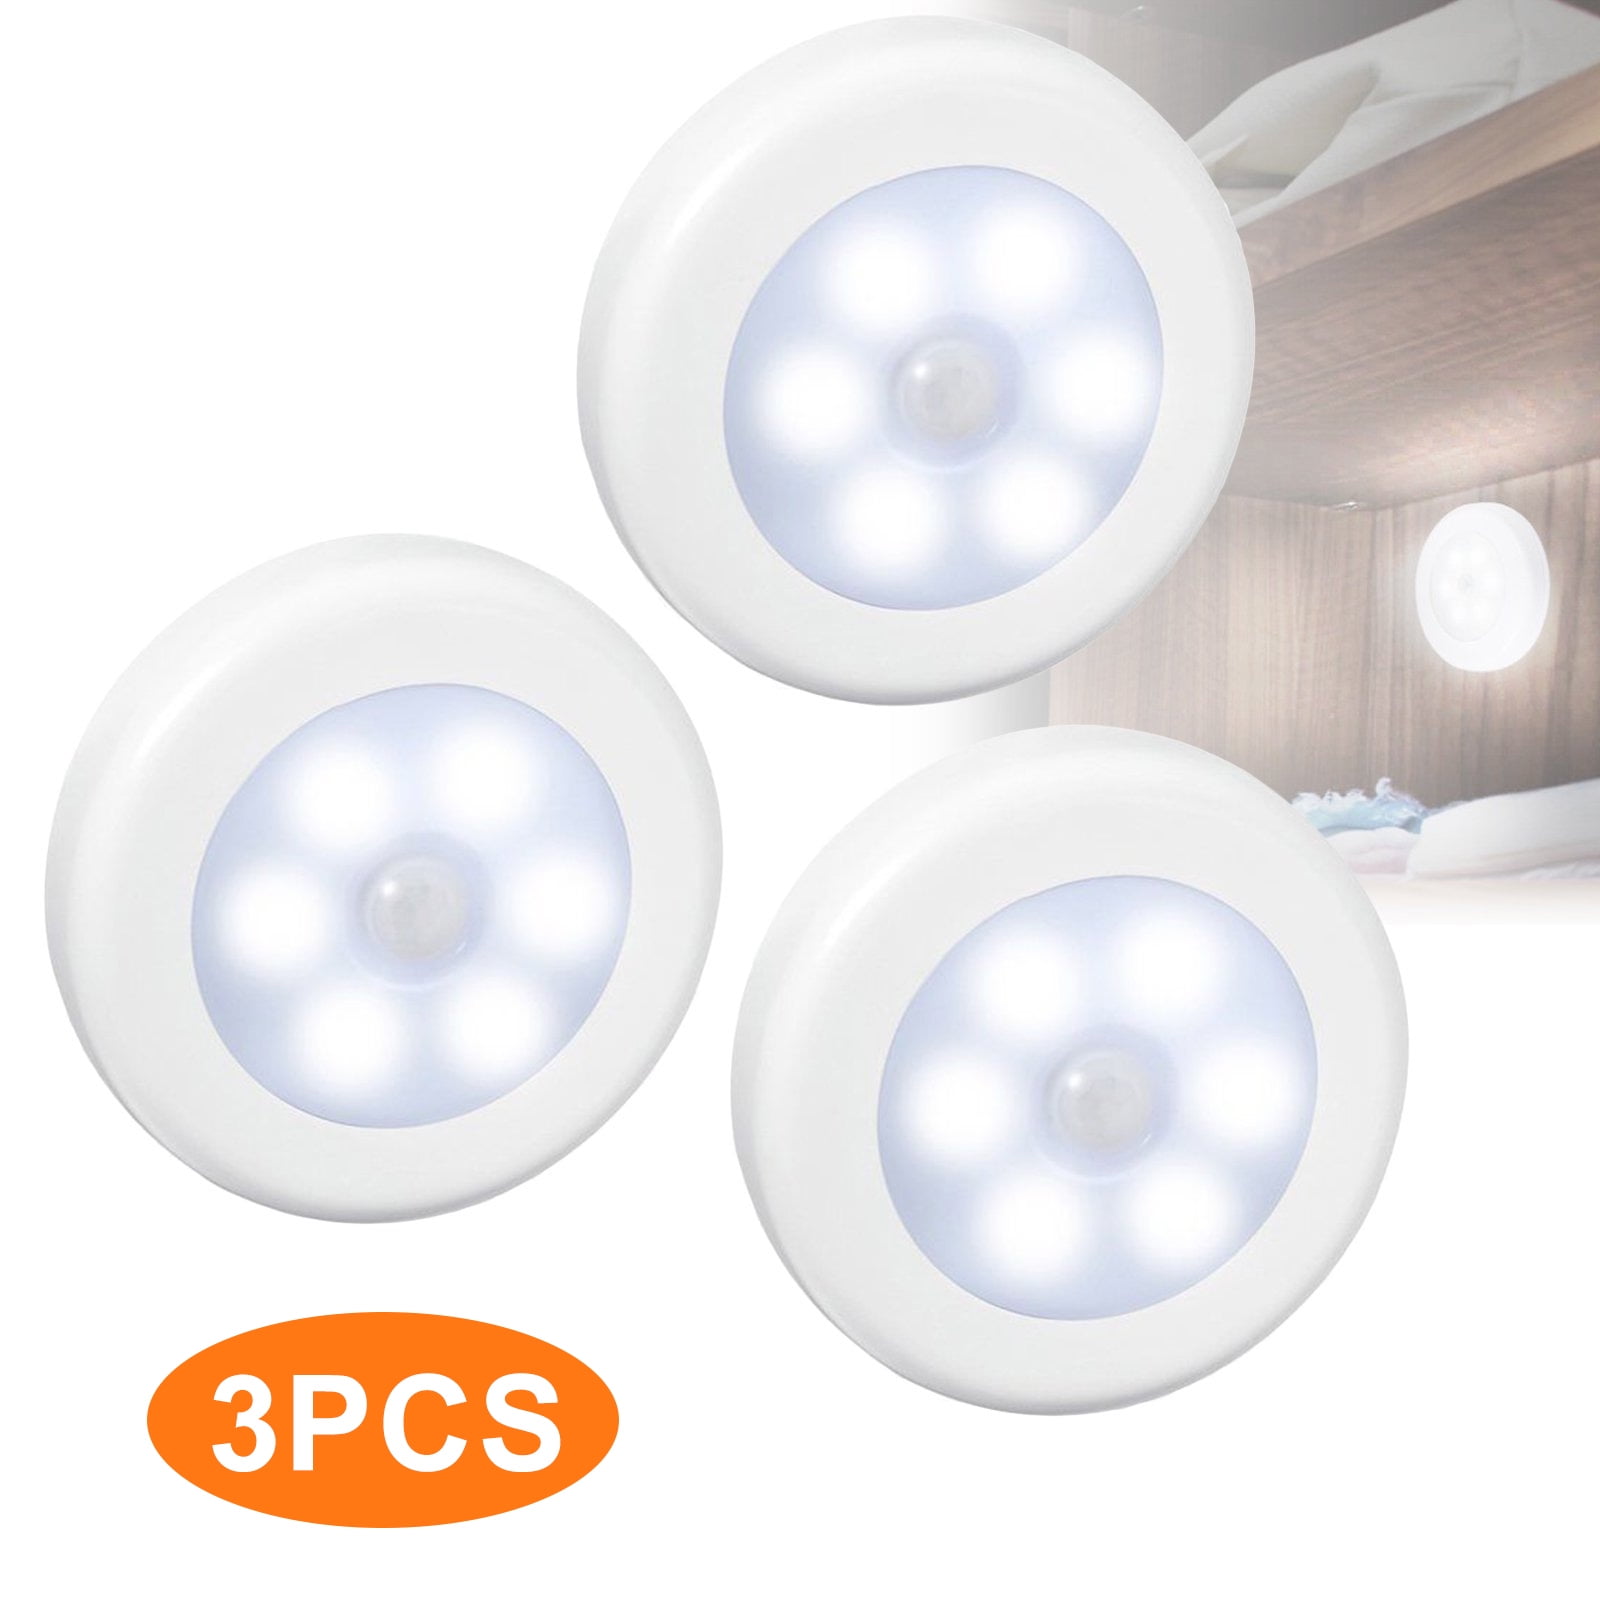 Details about   6 Motion Sensor  LED Night LightWall Closet Cabinet Stair Wireless Lamp 